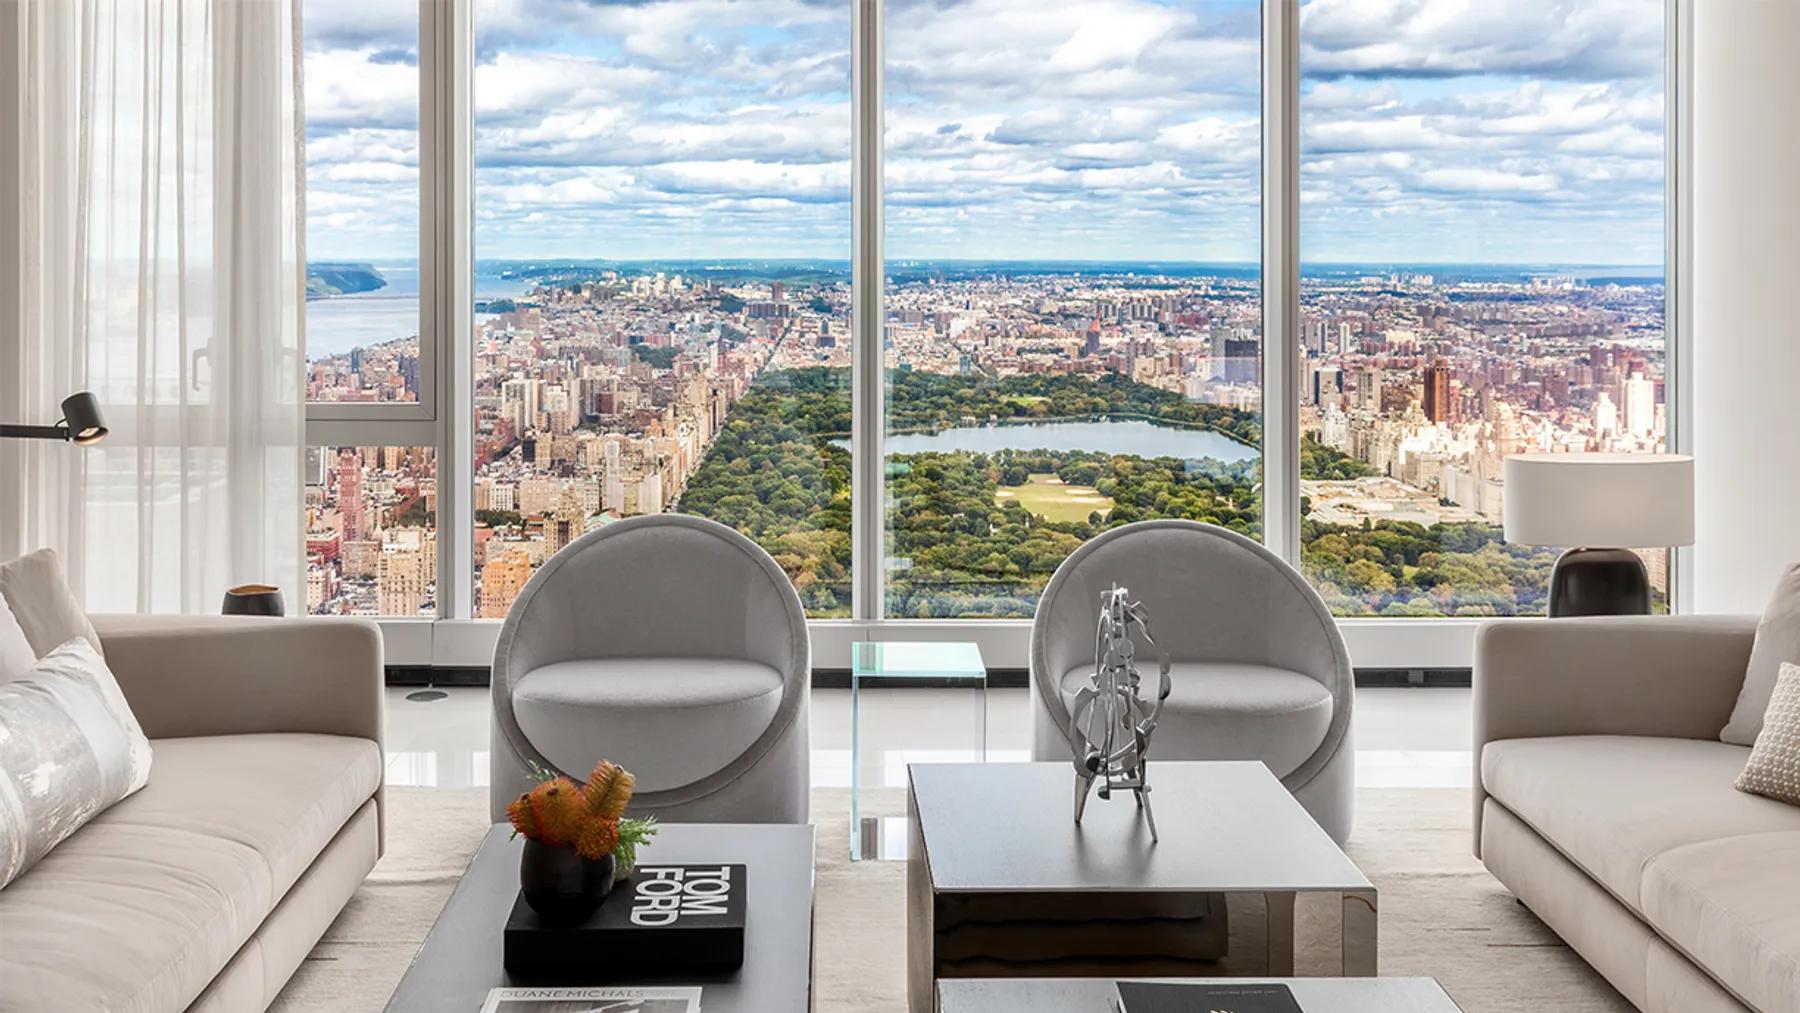 Find Luxury Real Estate Near Central Park, Manhattan | The Corcoran Group 